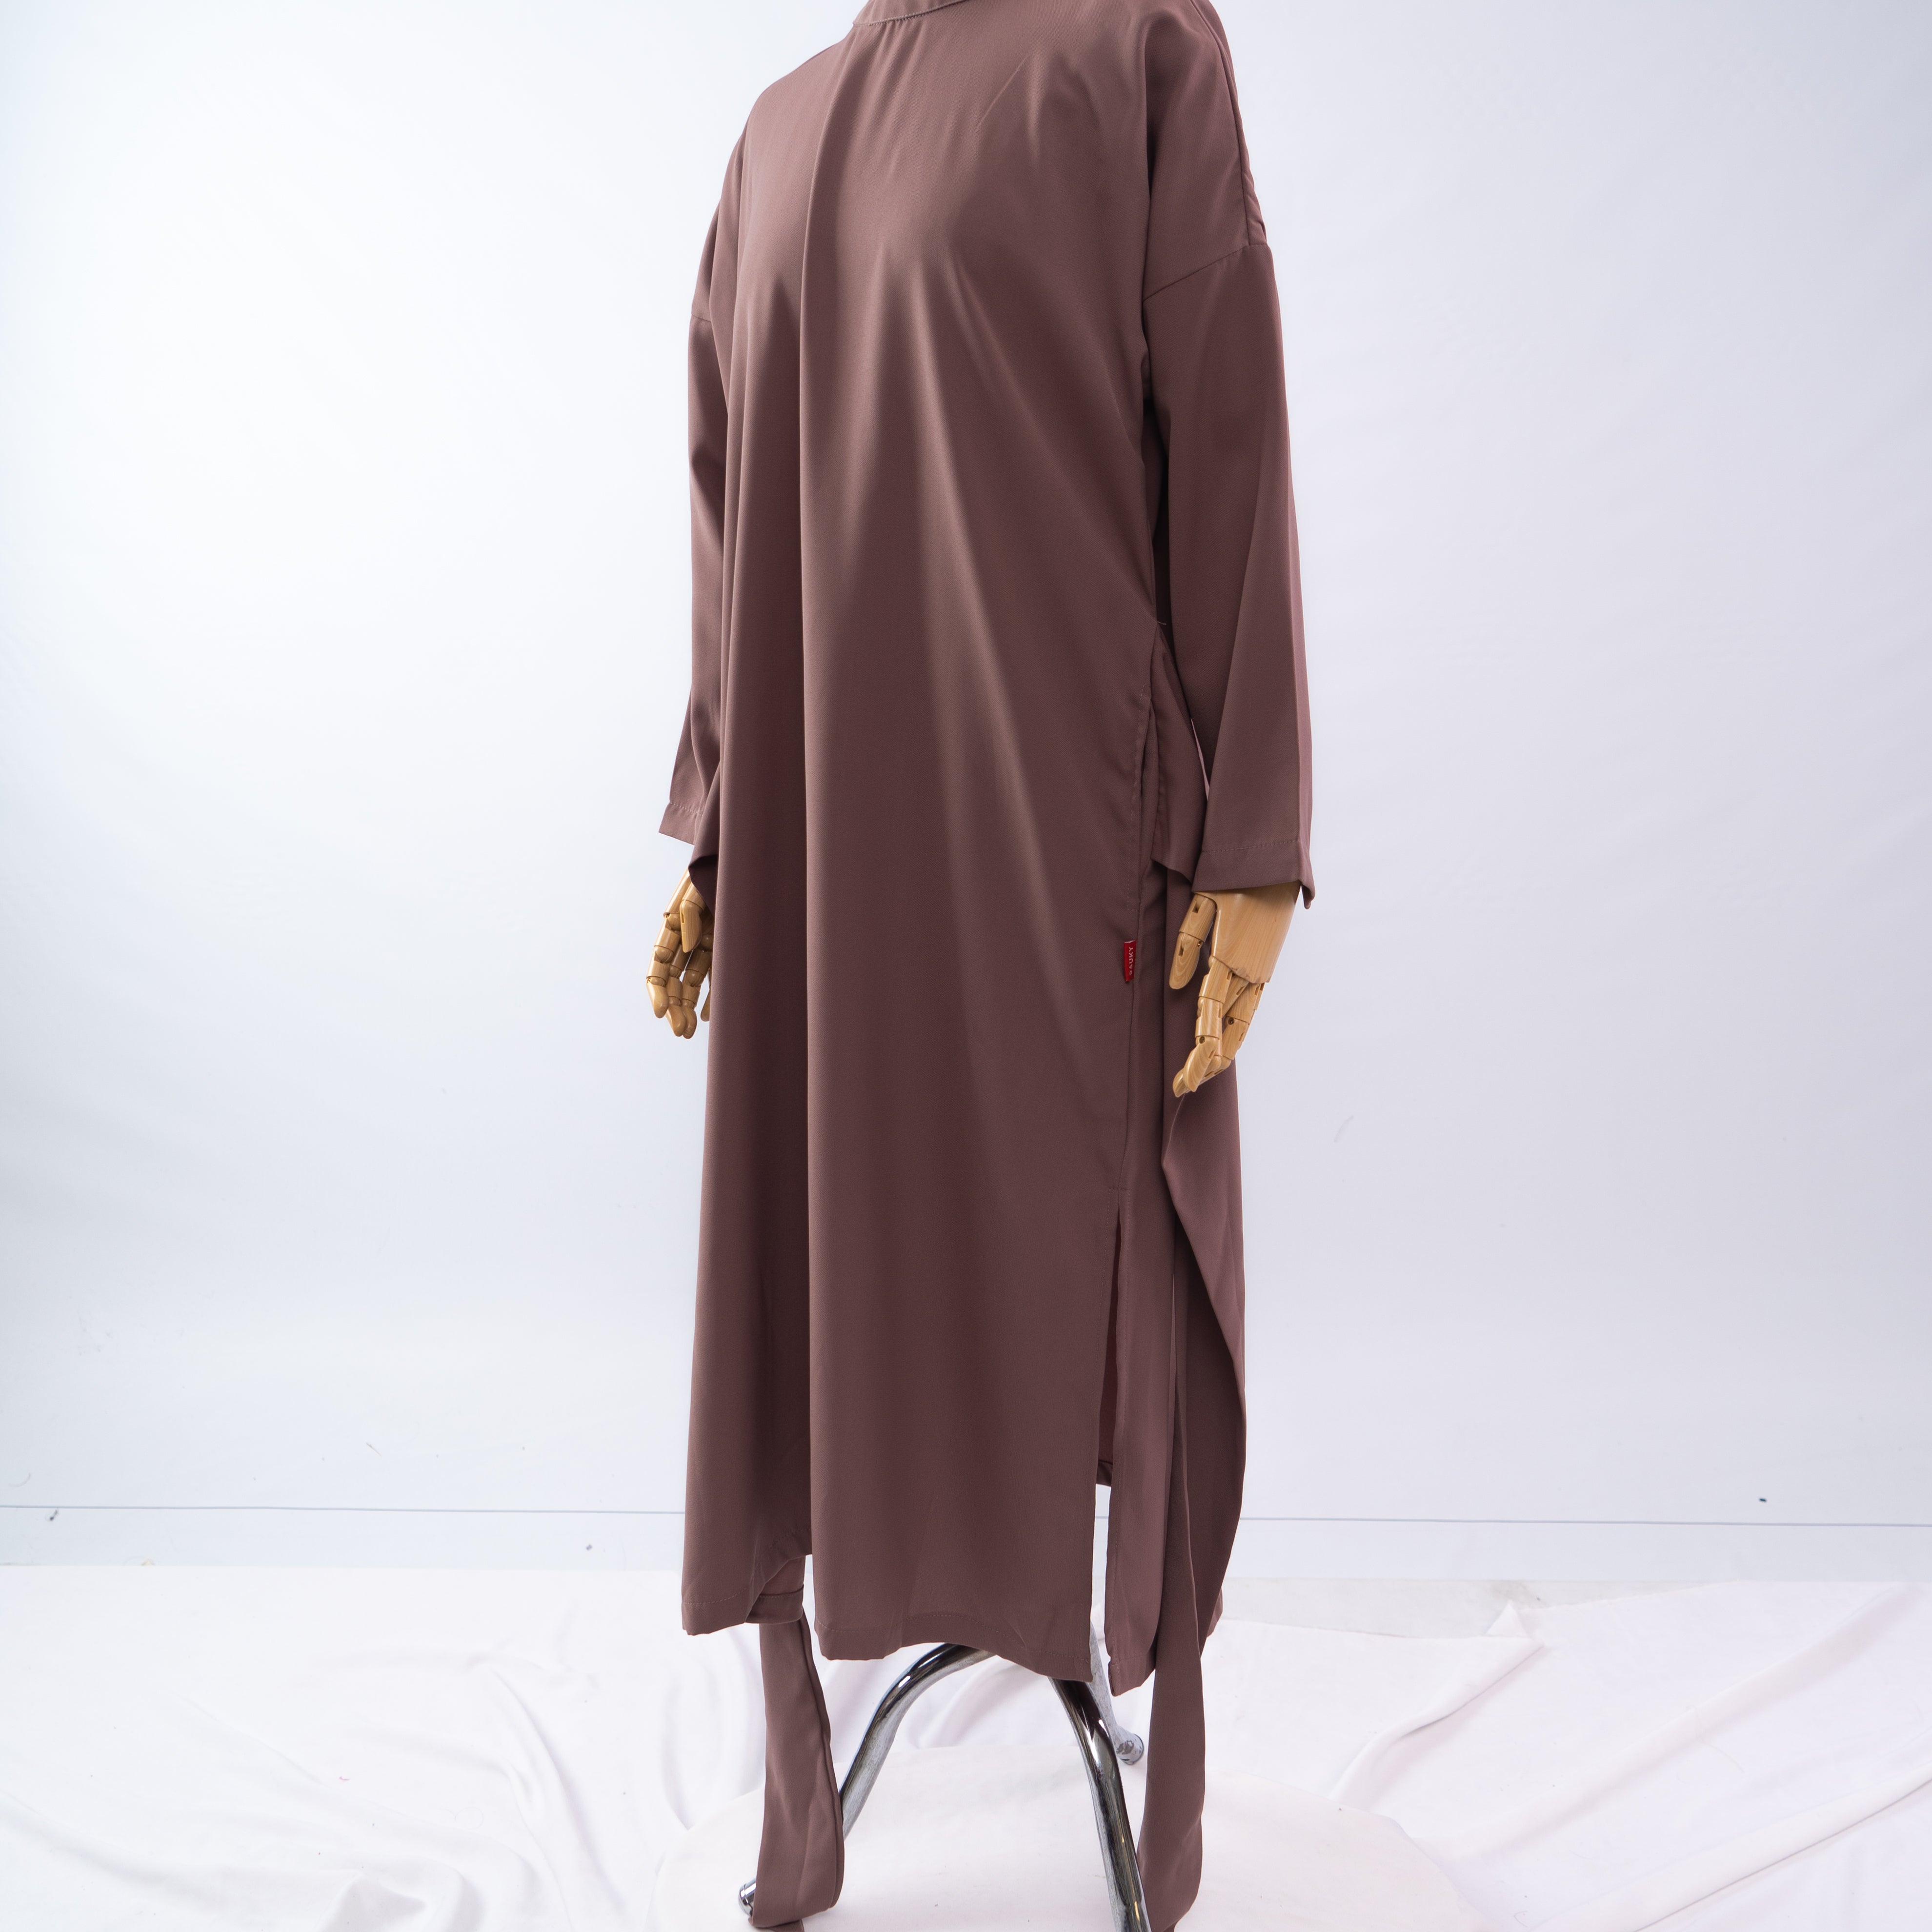 Dauky Gamis Limited Edition 34